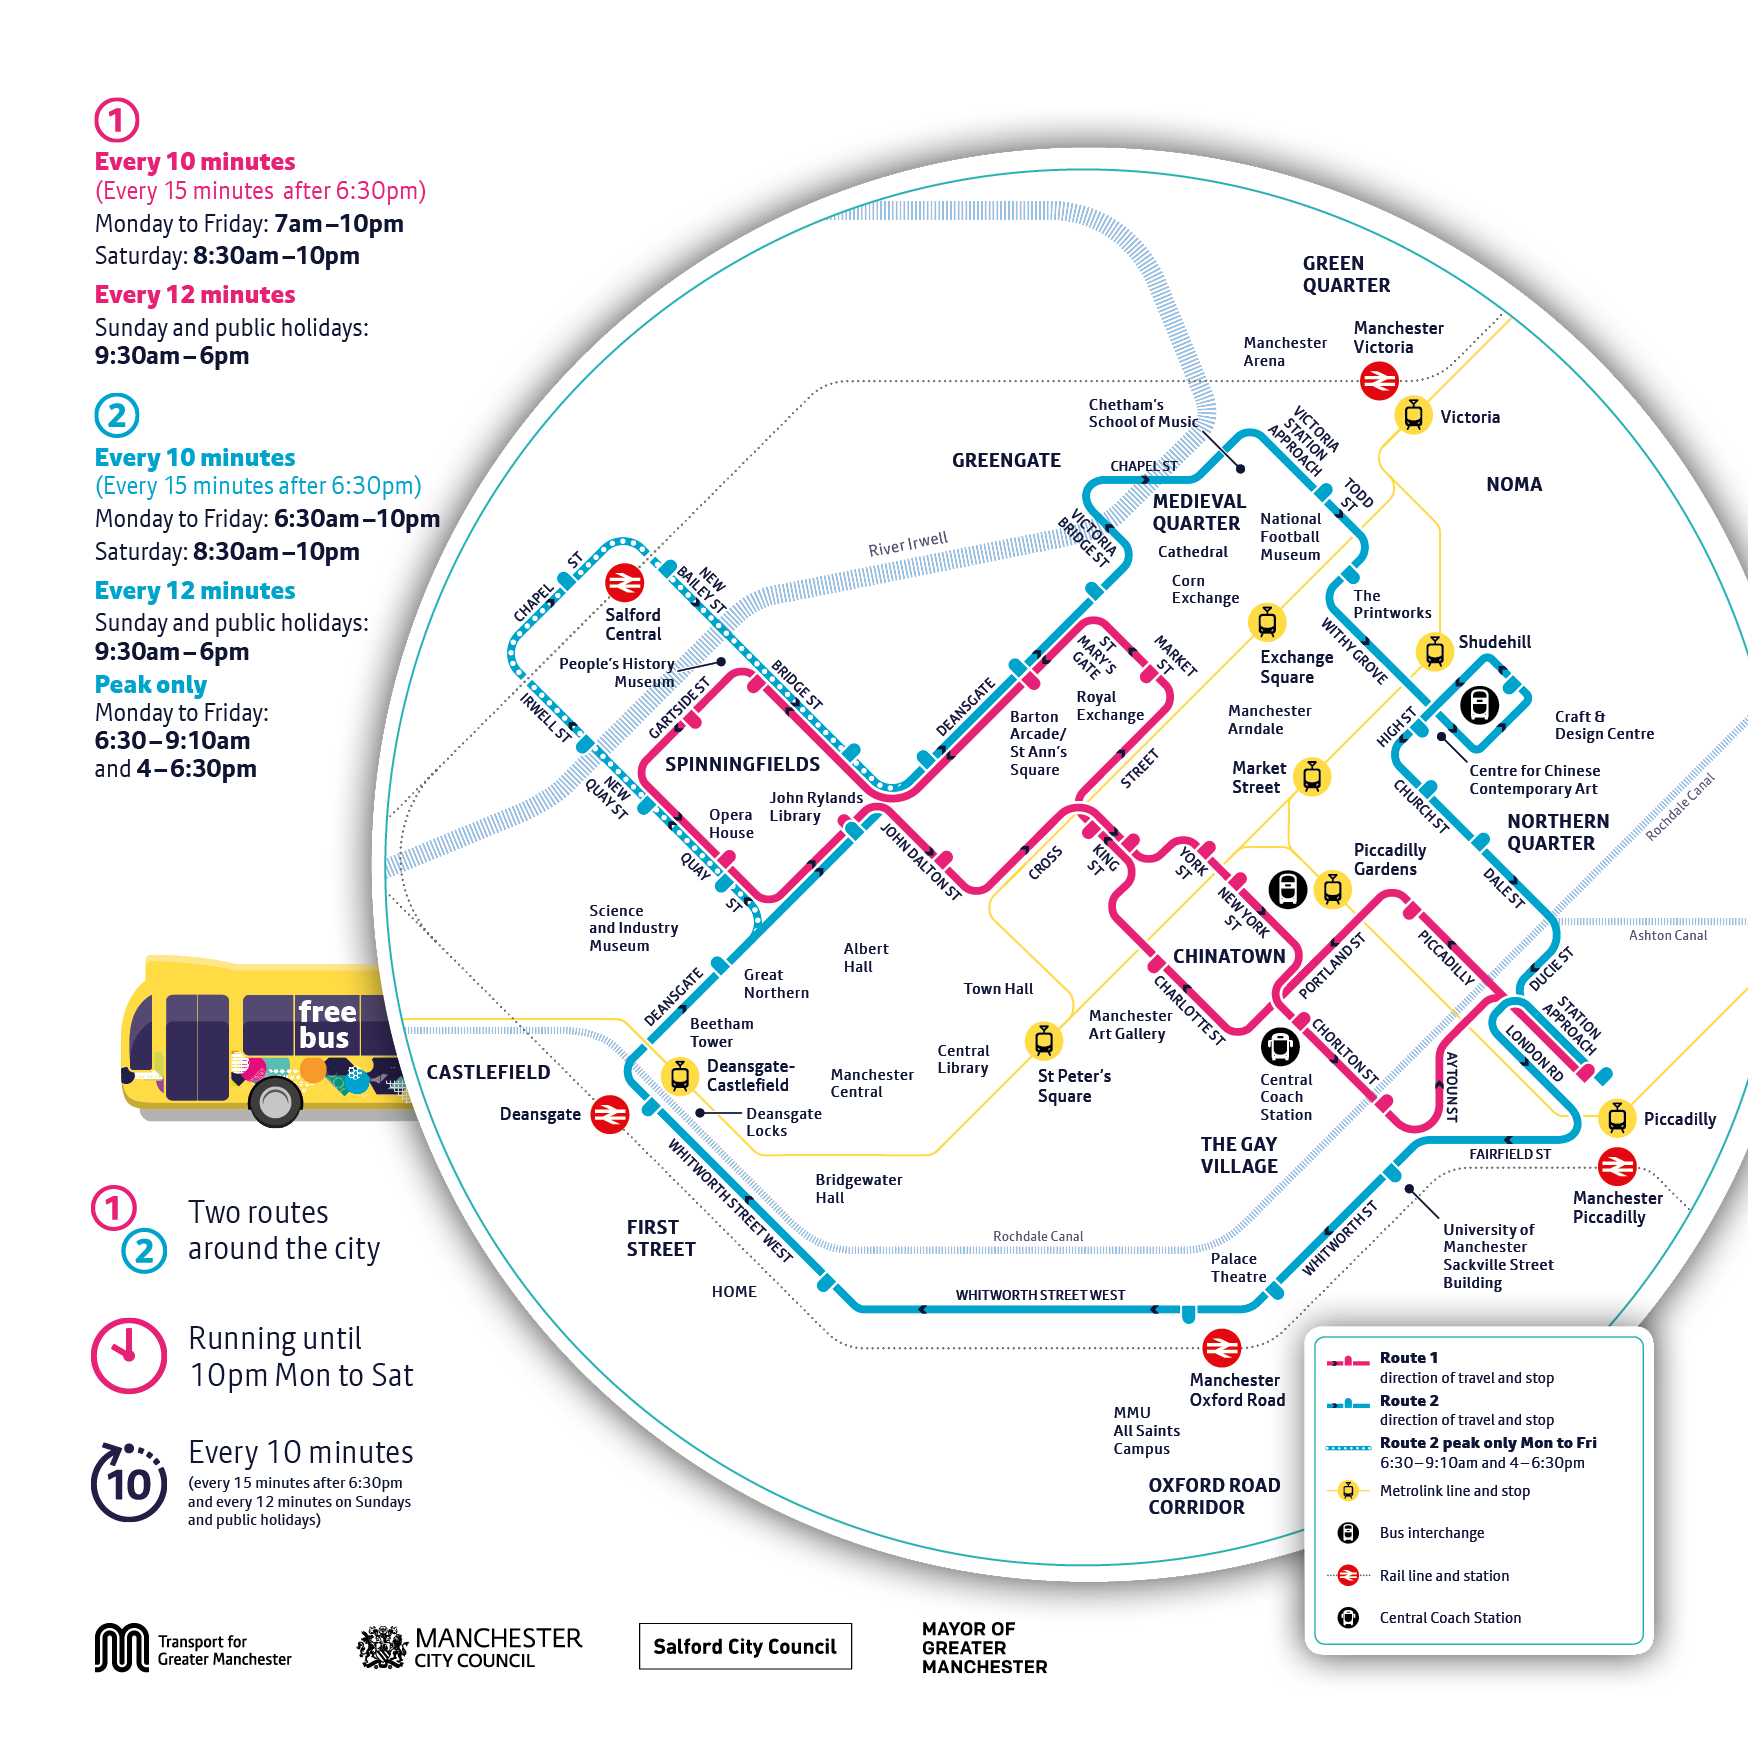 free bus free travel around Manchester city centre Transport for